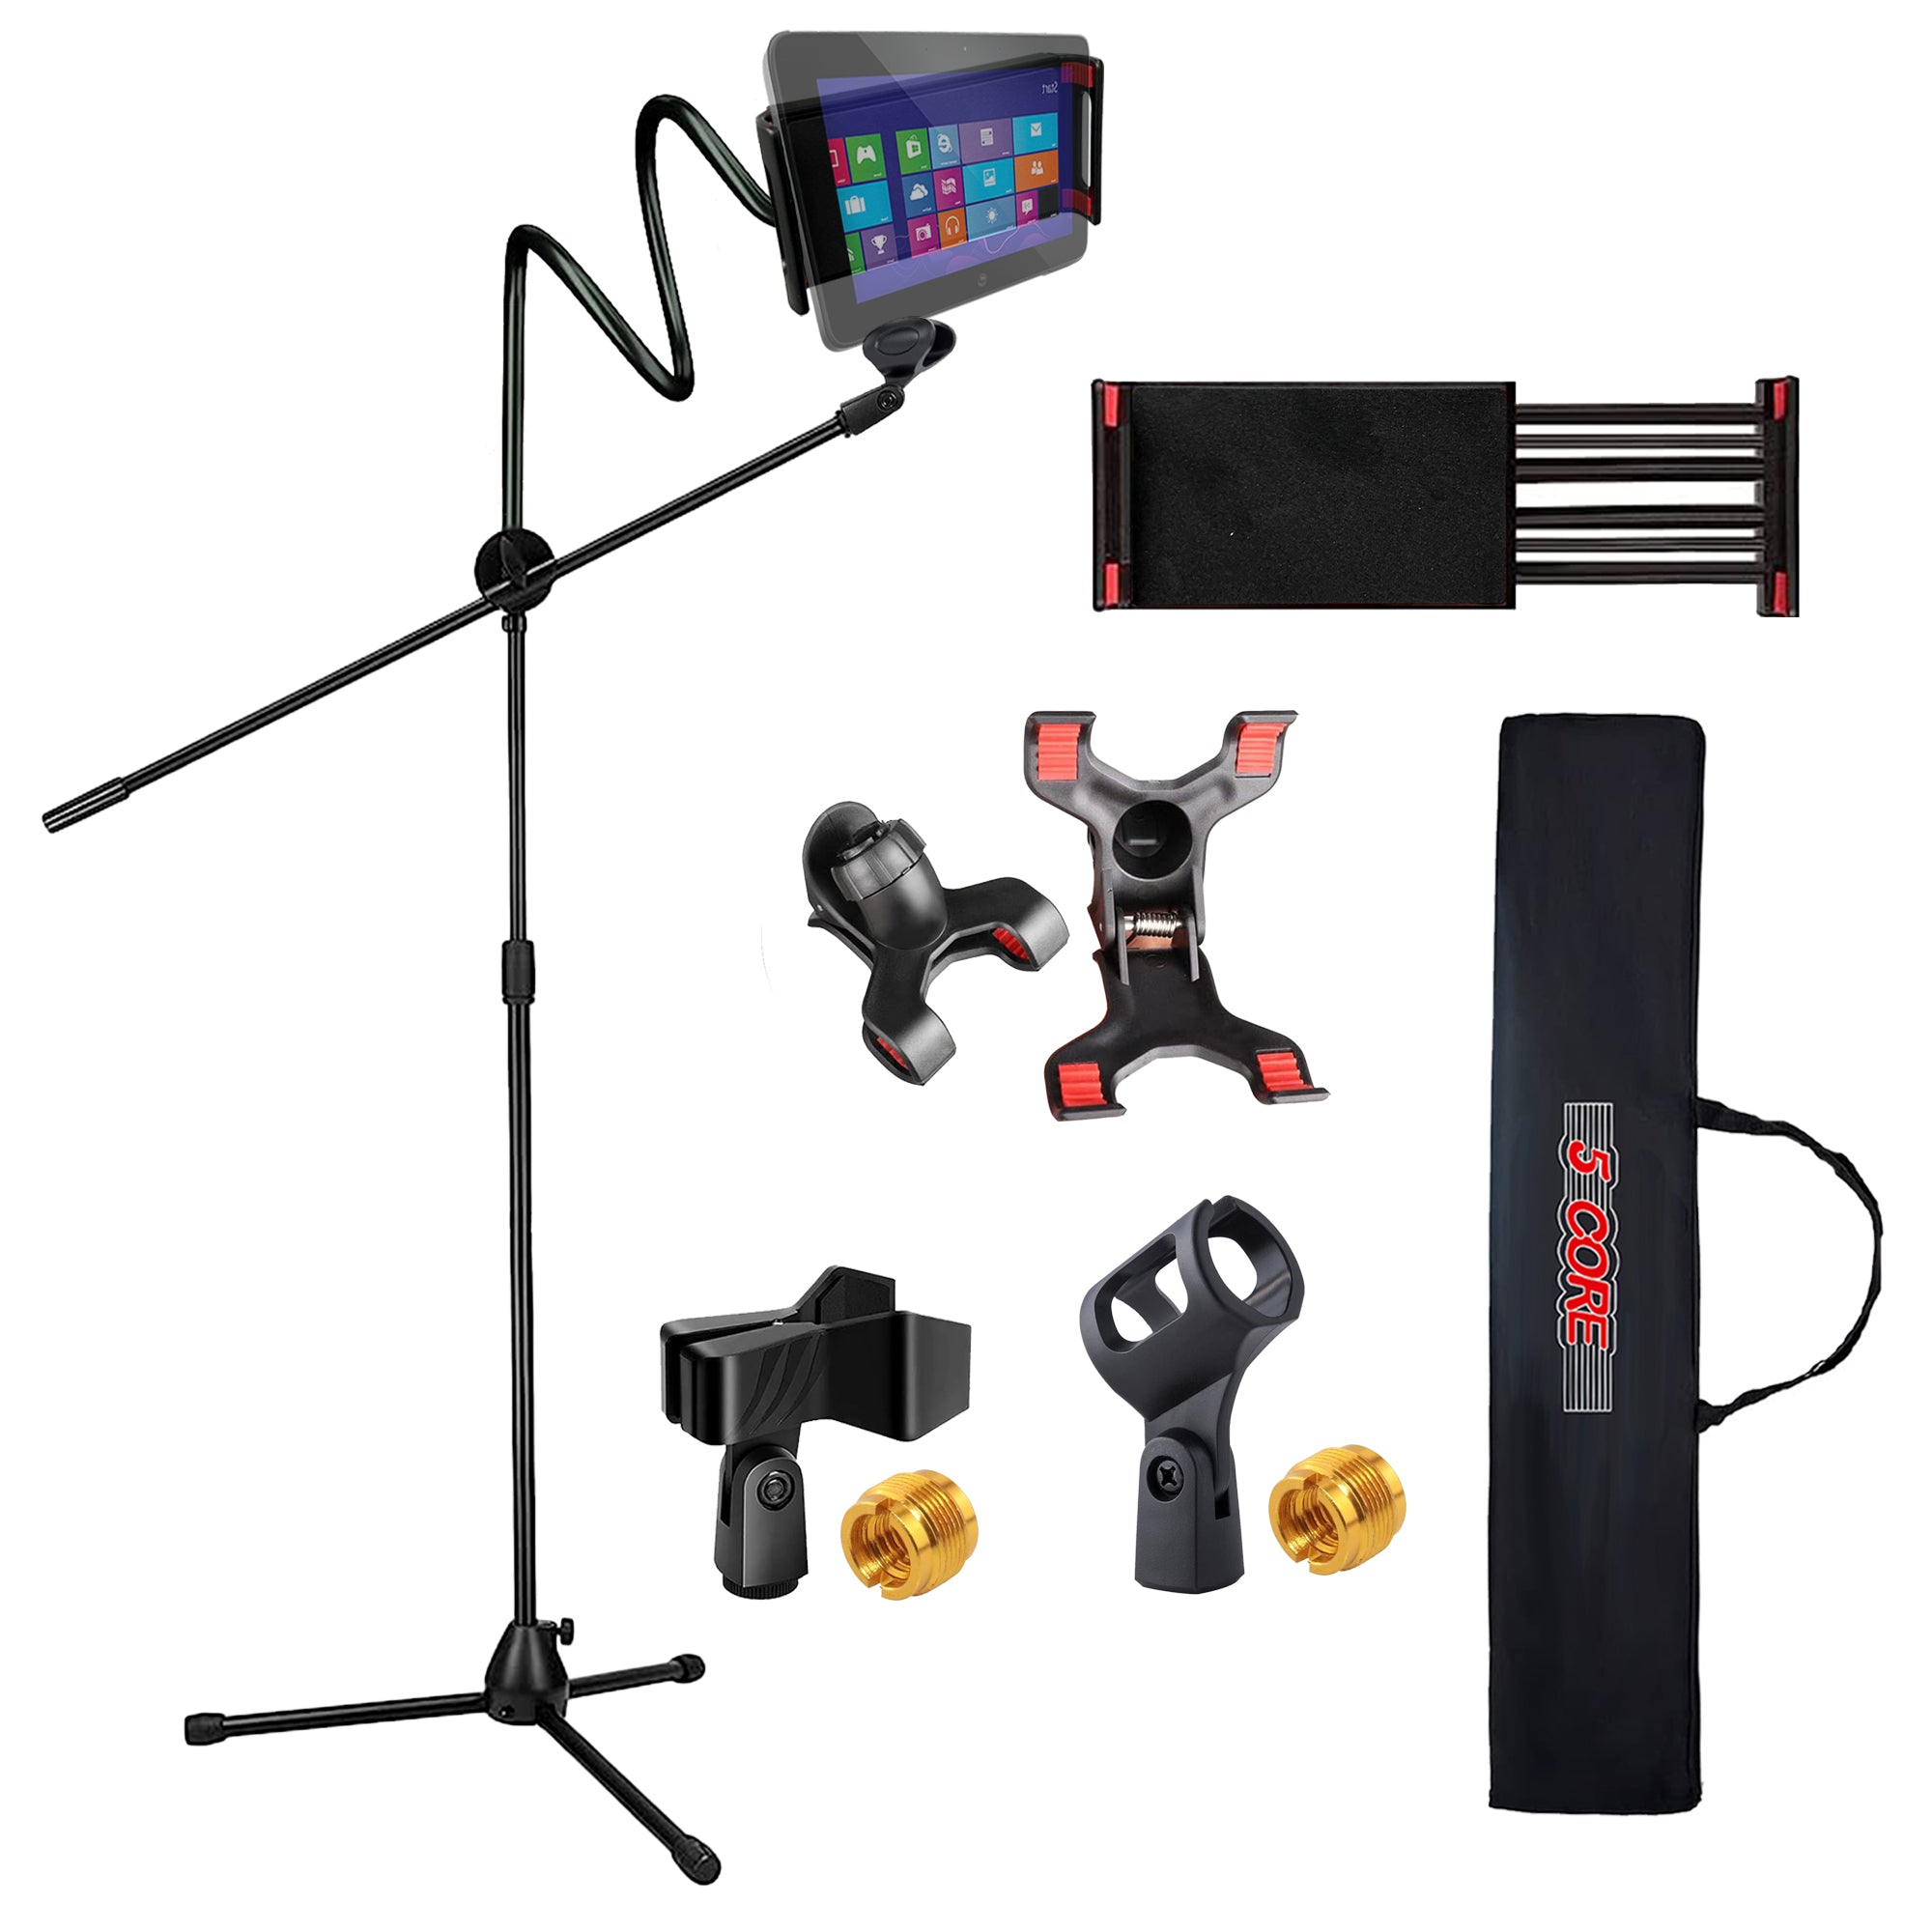 5 Core Microphone Stand + Phone Holder Floor Boom Mic Stand Gooseneck + Tablet Holder  Collapsible Adjustable Tripod Mic Stand w Two Mic Clips + Carry Bag for Singing Karaoke Studio Parties -MS MOB